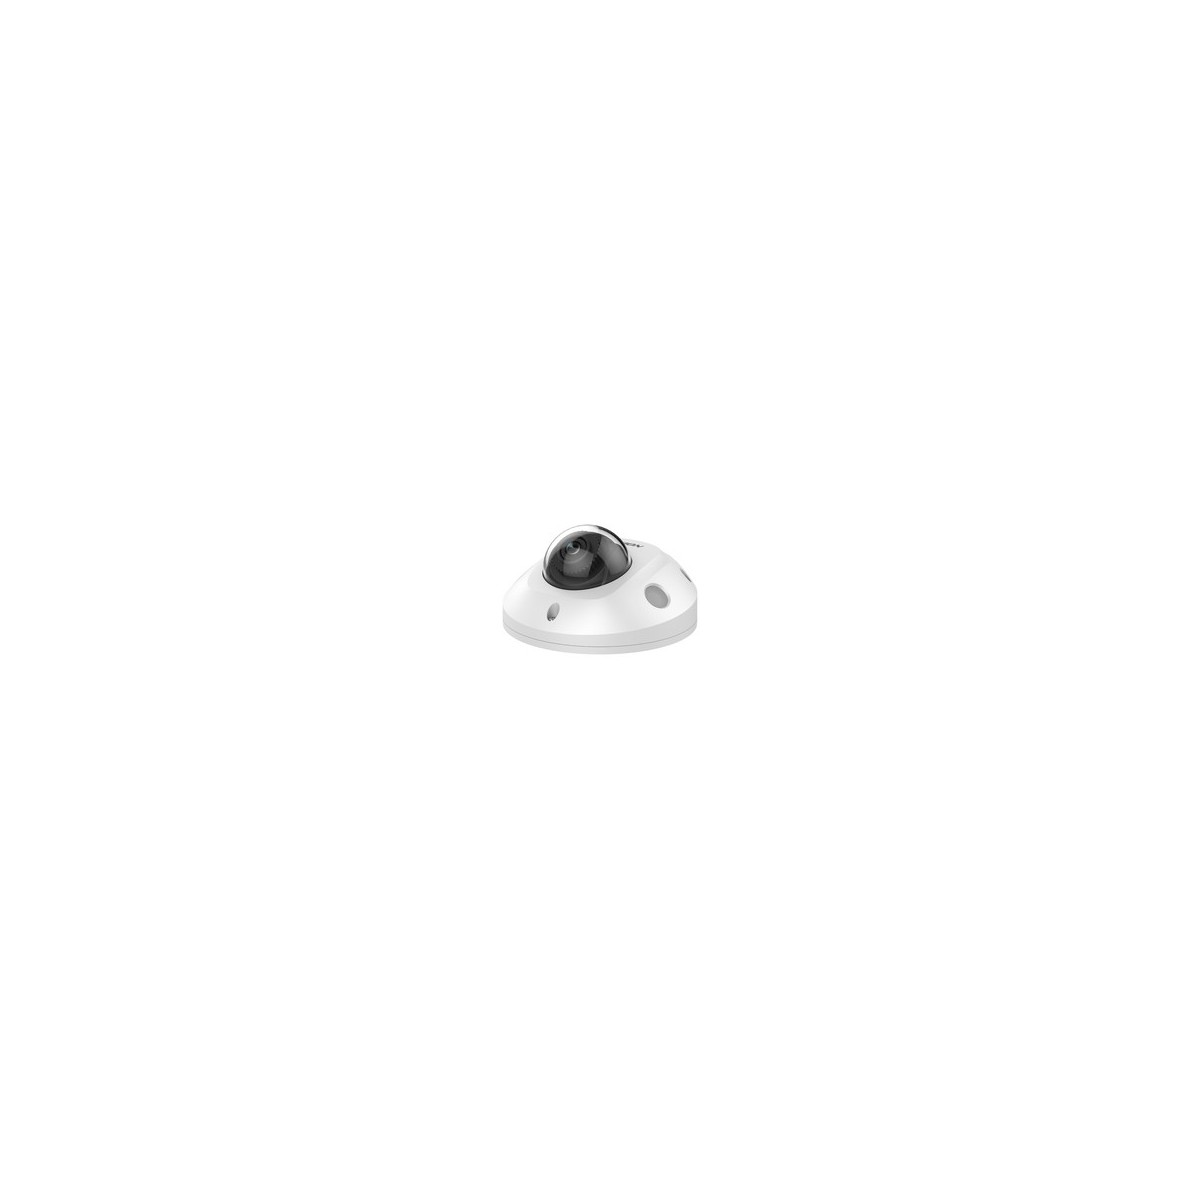 Hikvision Digital Technology DS-2CD2546G2-I - IP security camera - Outdoor - Wired - Ceiling-wall - White - Dome